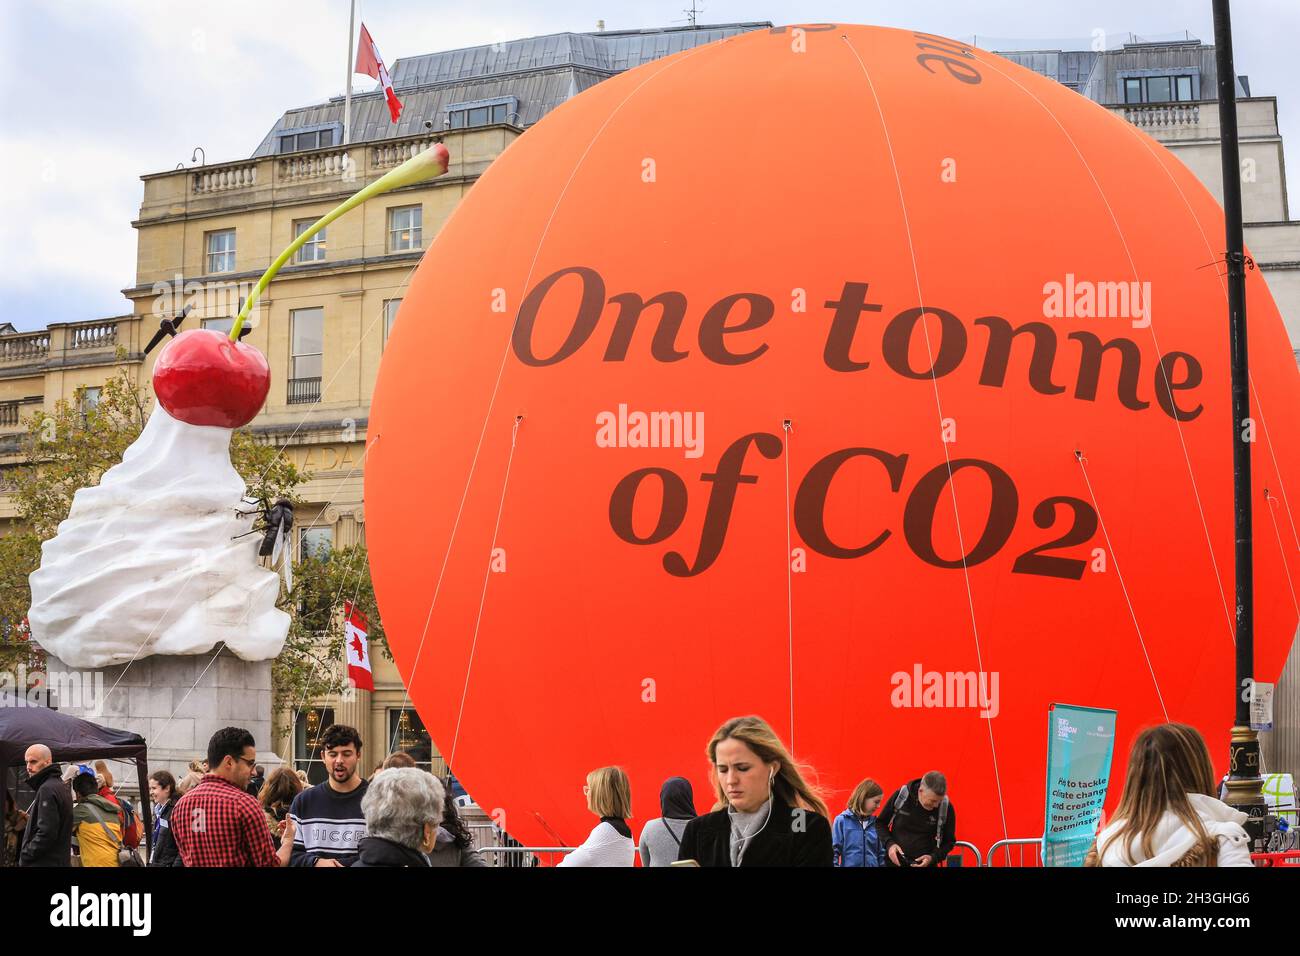 One Tonne Of Co2 High Resolution Stock Photography and Images - Alamy